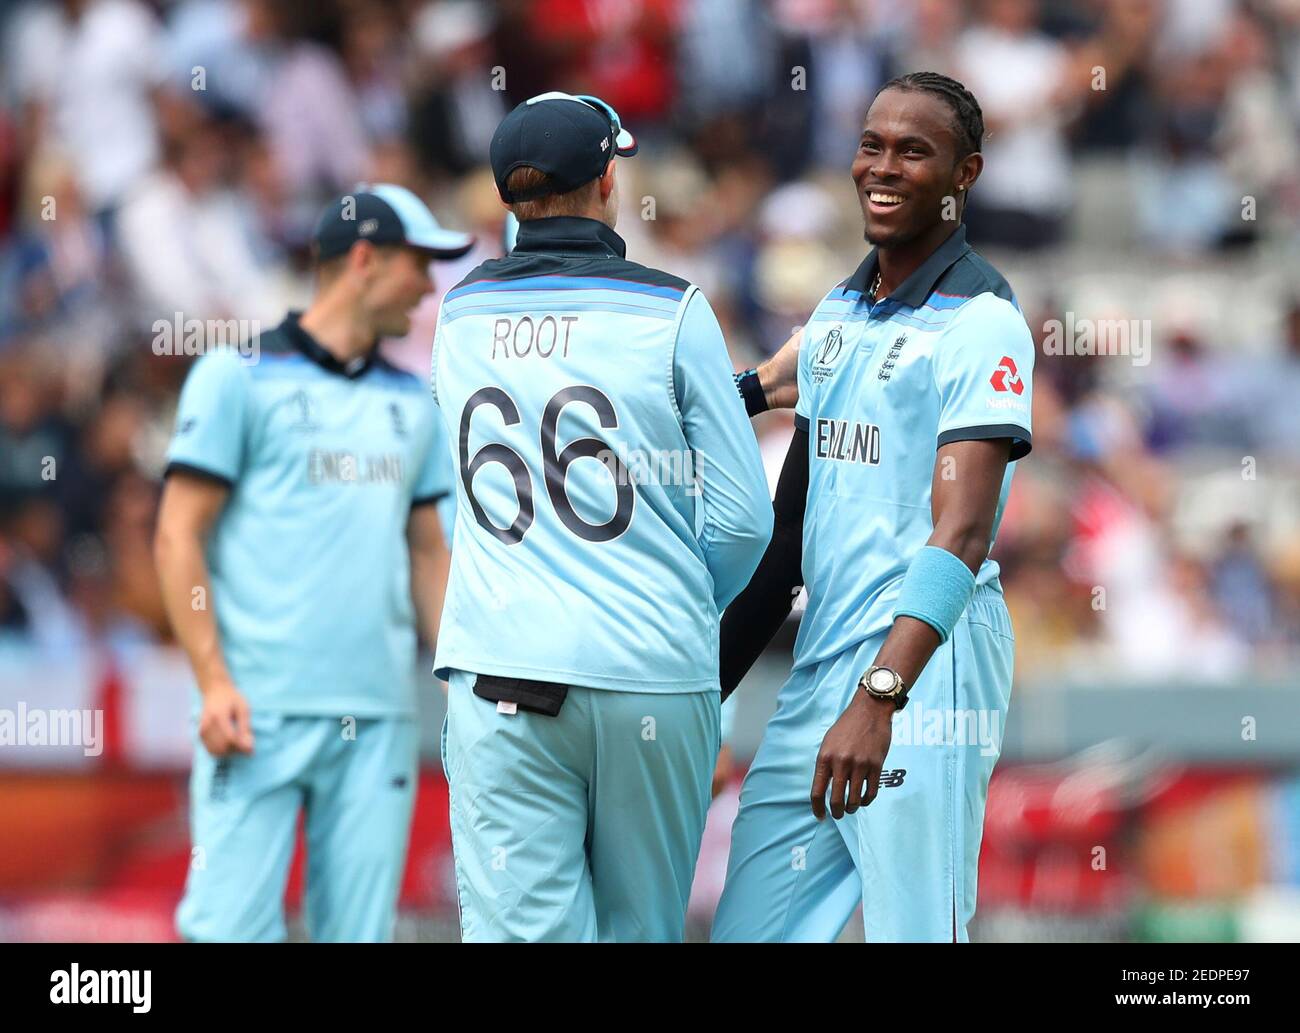 JOFRA ARCHER ENGLAND CRICKET UNSIGNED HUGE 16X12 PHOTO 2 WORLD CUP FINAL 